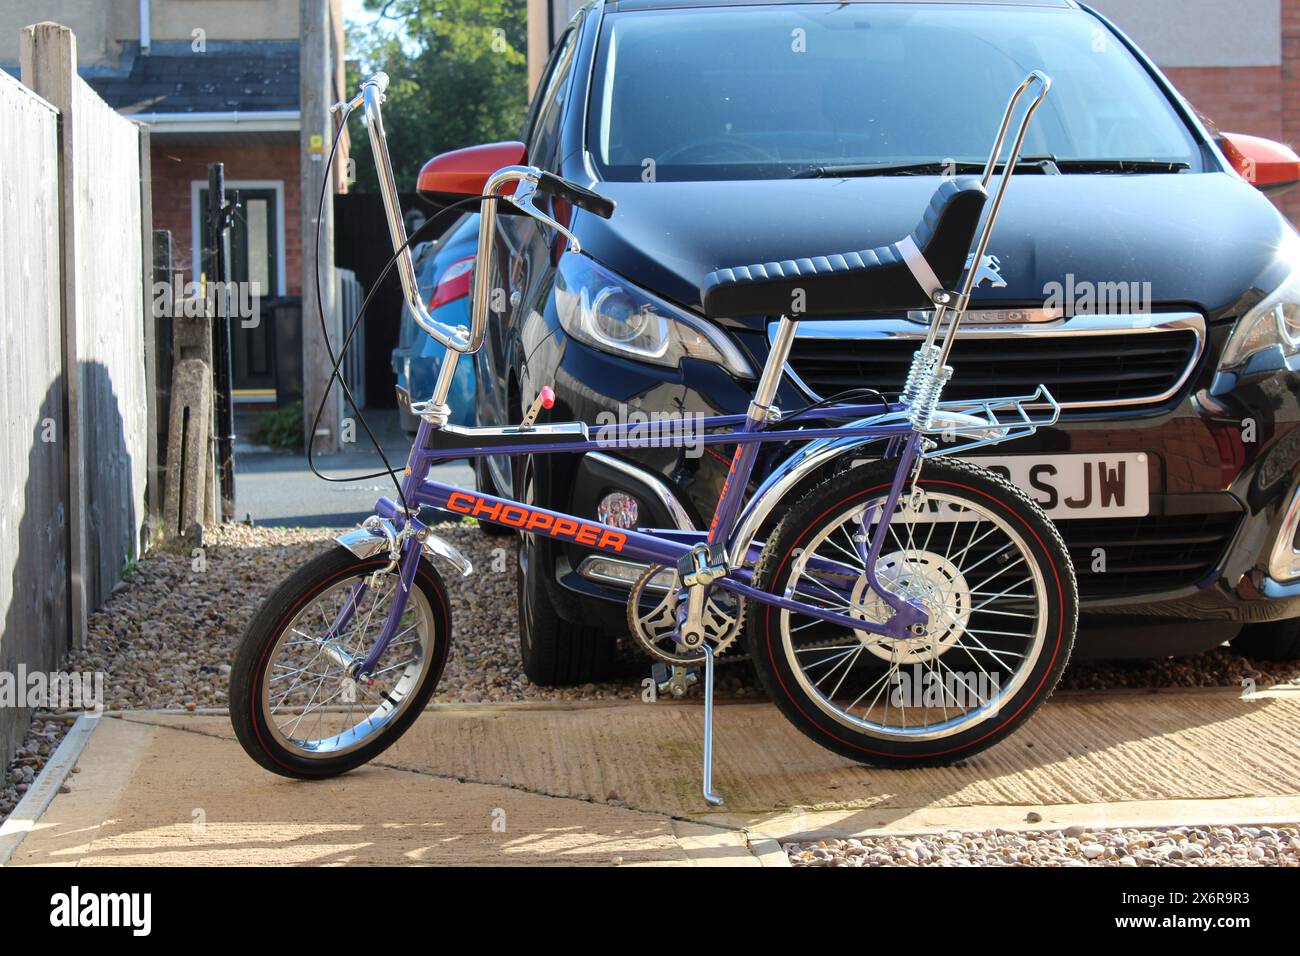 ultra violet raleigh chopper stood on its own on its stand in front of a car Stock Photo